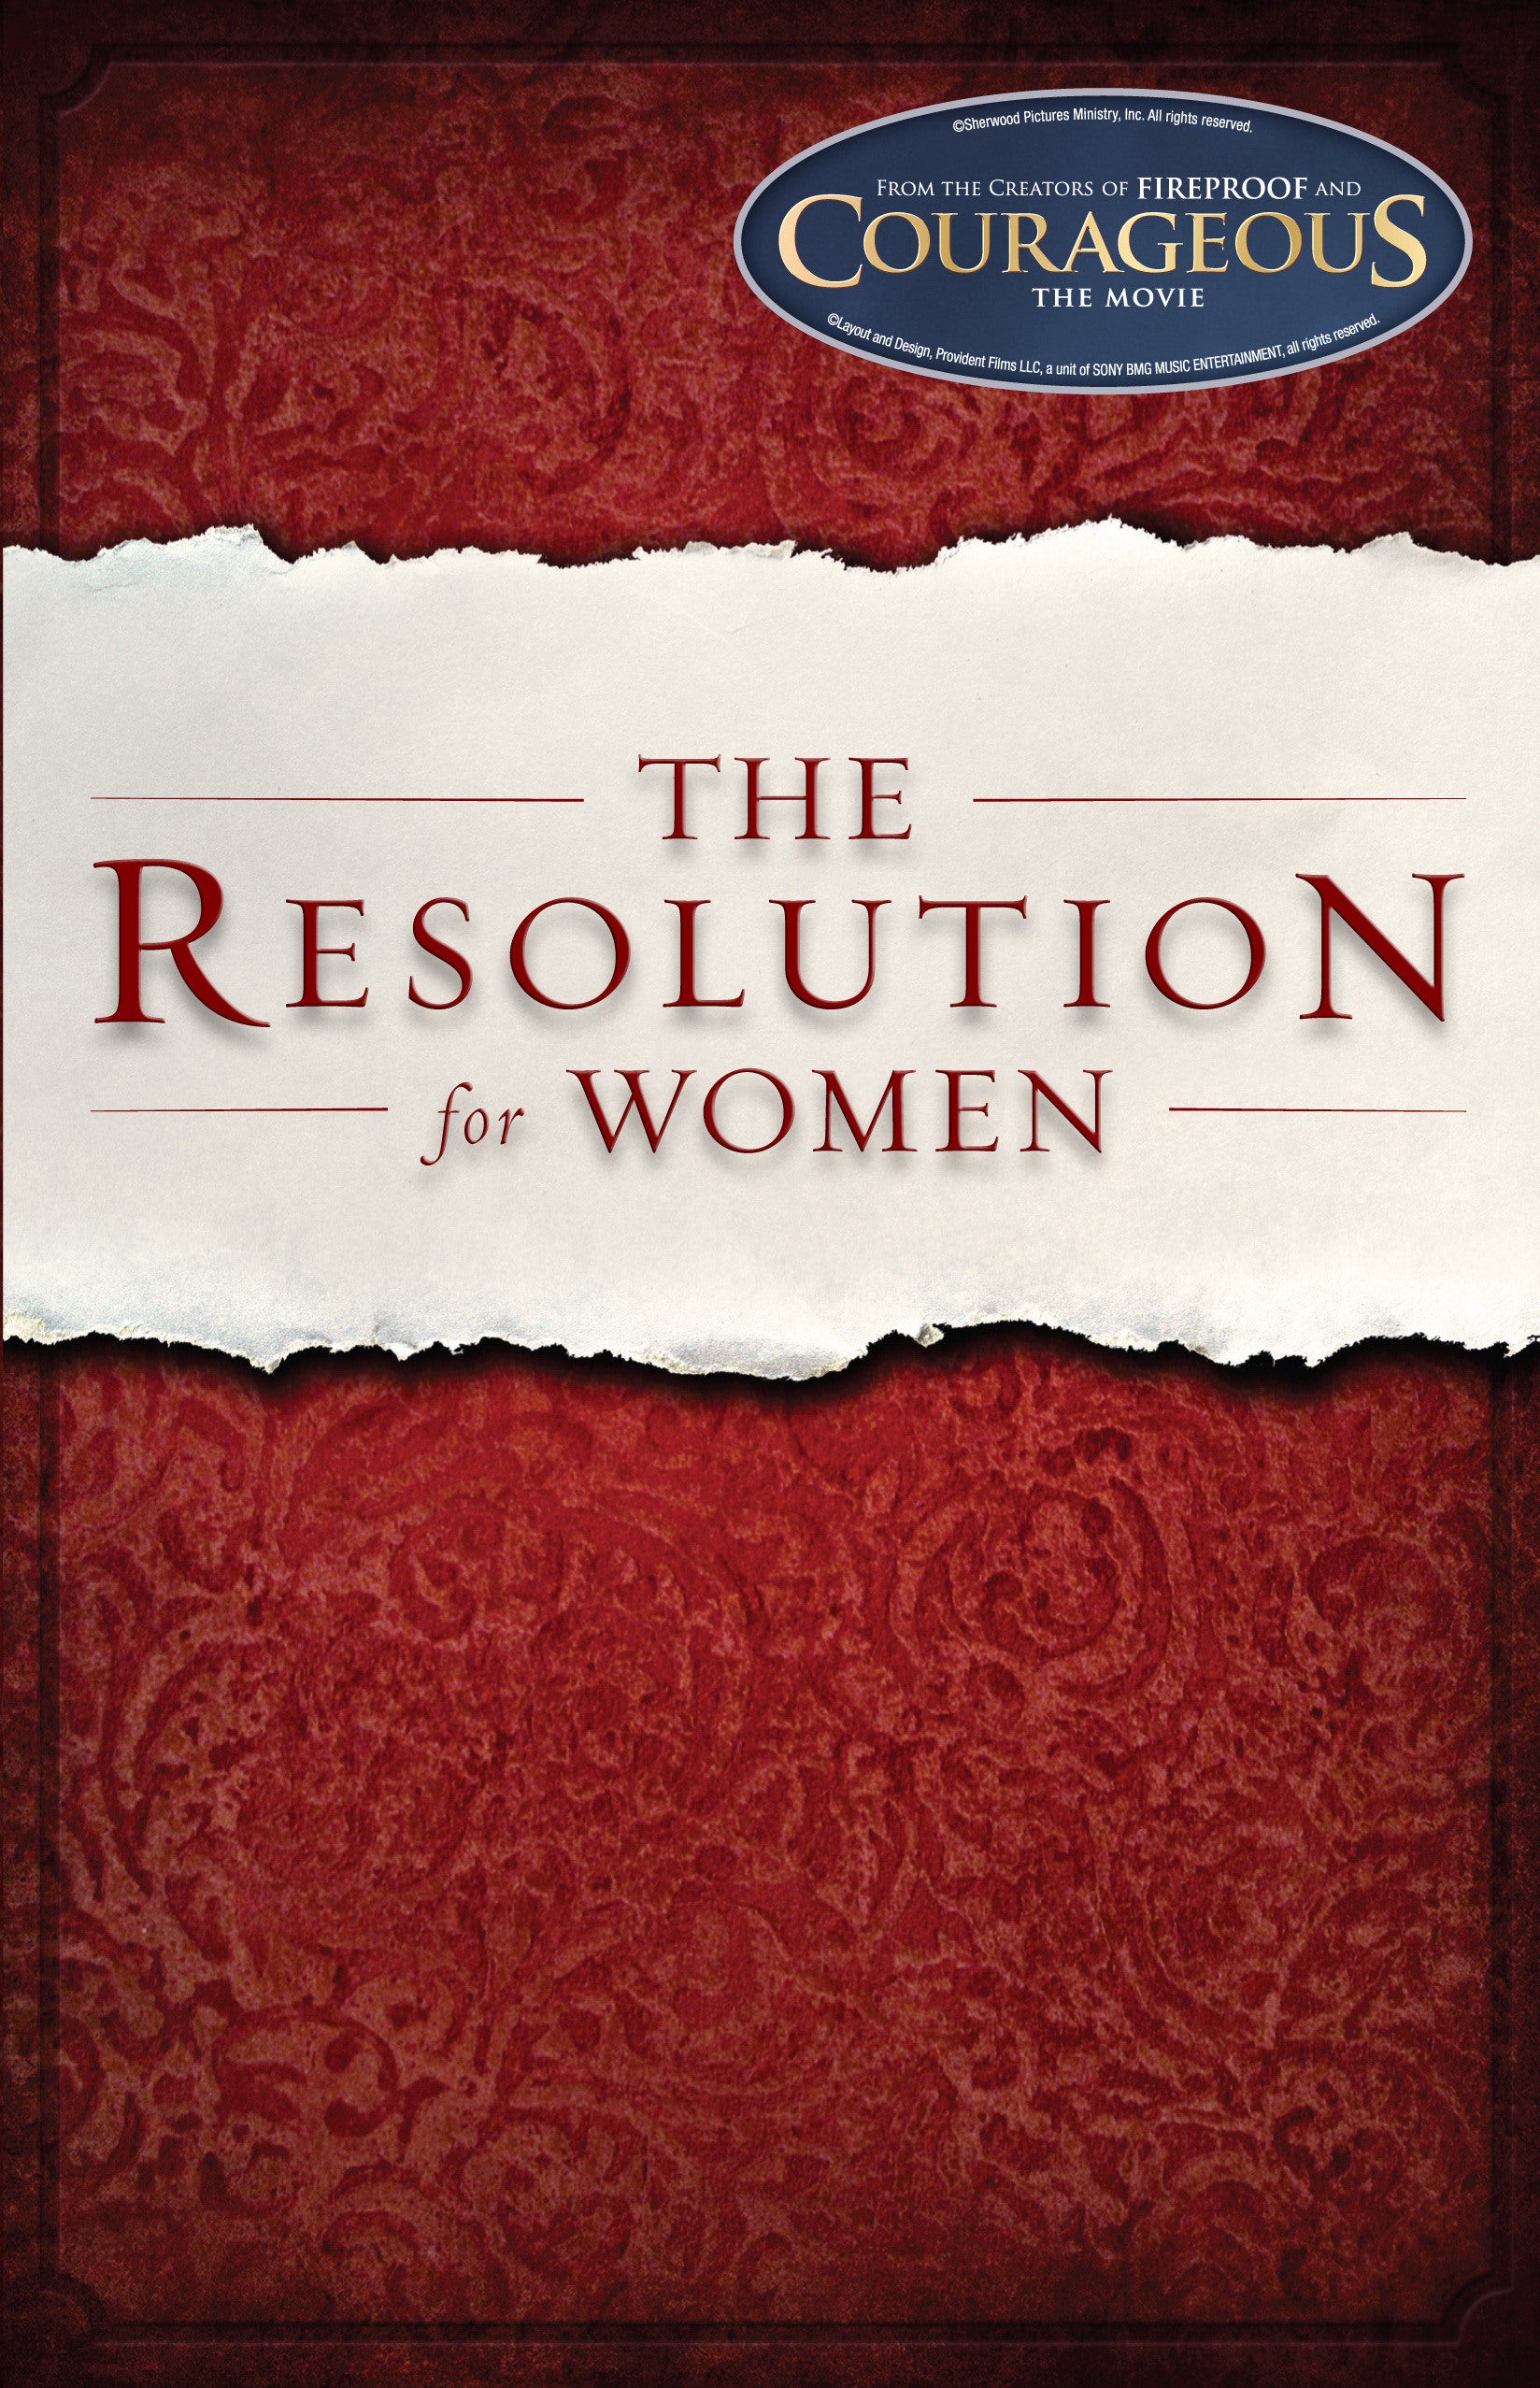 Image of Resolution For Women  other